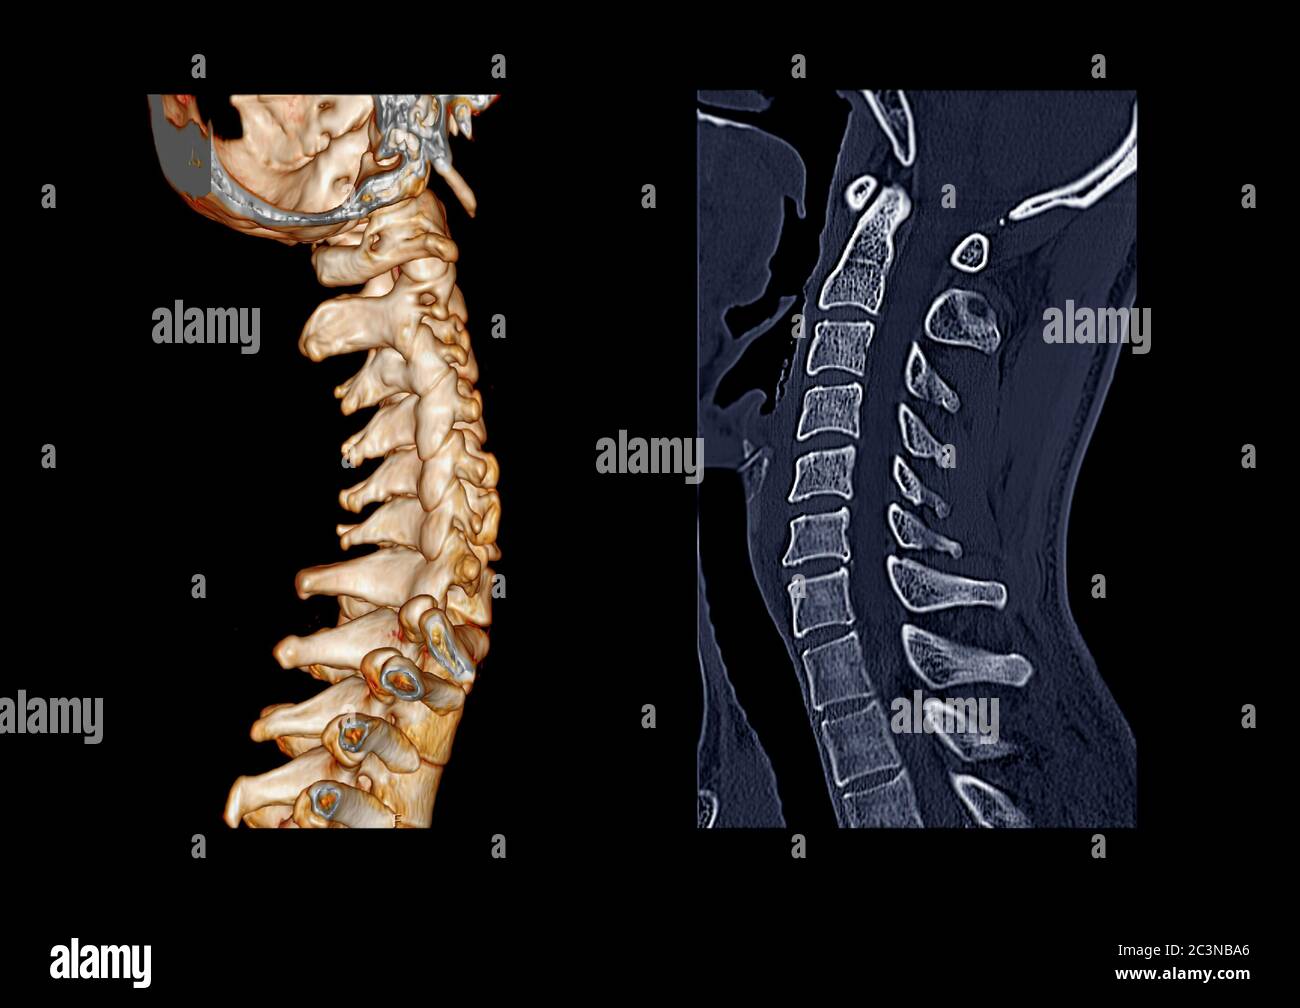 Compare of CT C-Spine or Cervical spine  3D Rendering image  and sagittal  view in patient trauma cervical spine injury. Stock Photo